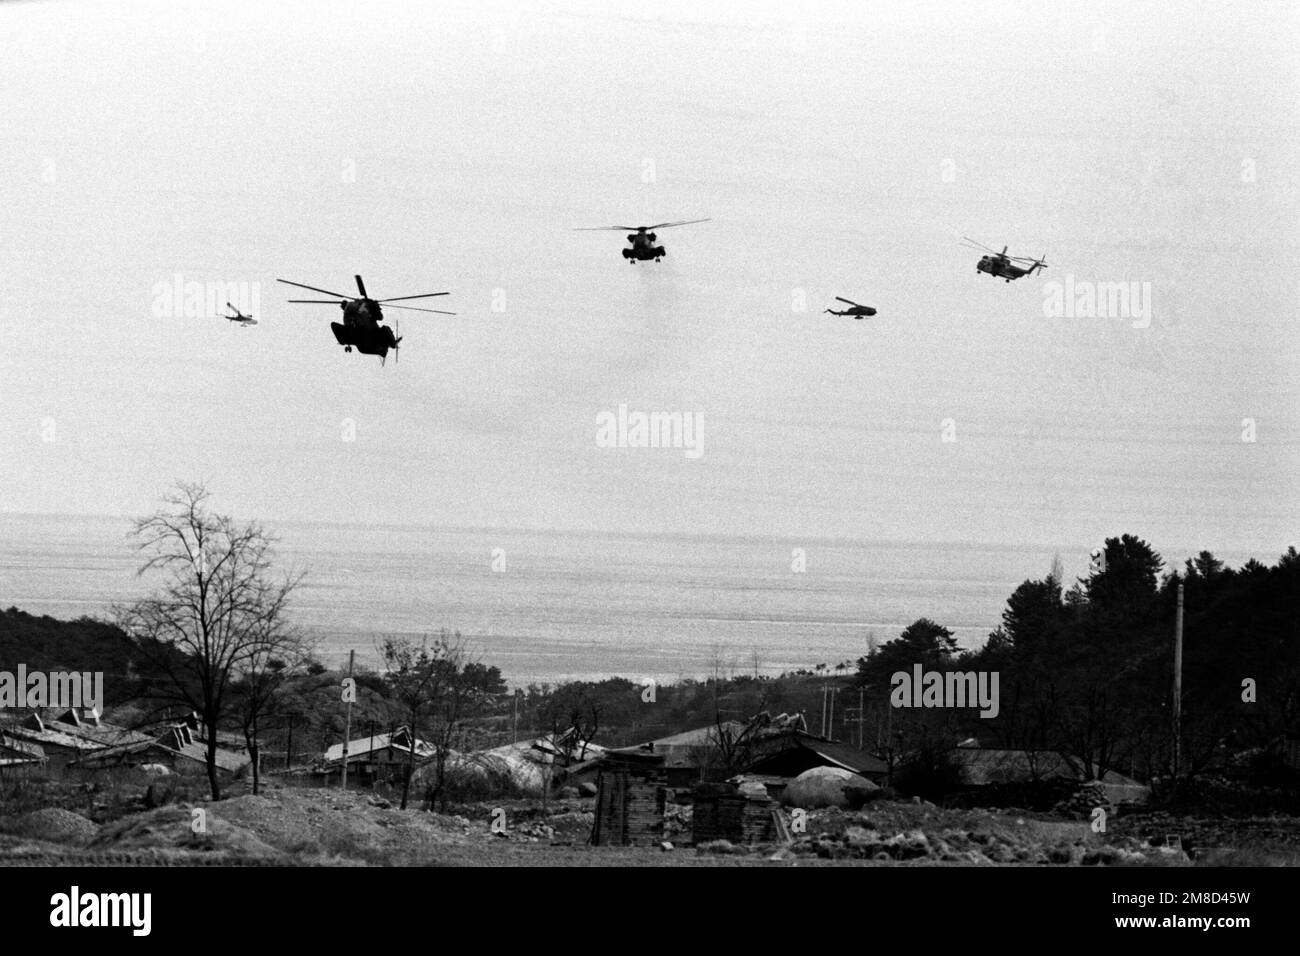 Three Marine Corps CH-53 Sea Stallion helicopters, accompanied by two AH-1 Sea Cobra helicopters, at left and second from right, approach a landing zone near the coast during the combined South Korean/U.S. exercise Team Spirit '90. Subject Operation/Series: TEAM SPIRIT '90 Country: Republic Of Korea (KOR) Stock Photo